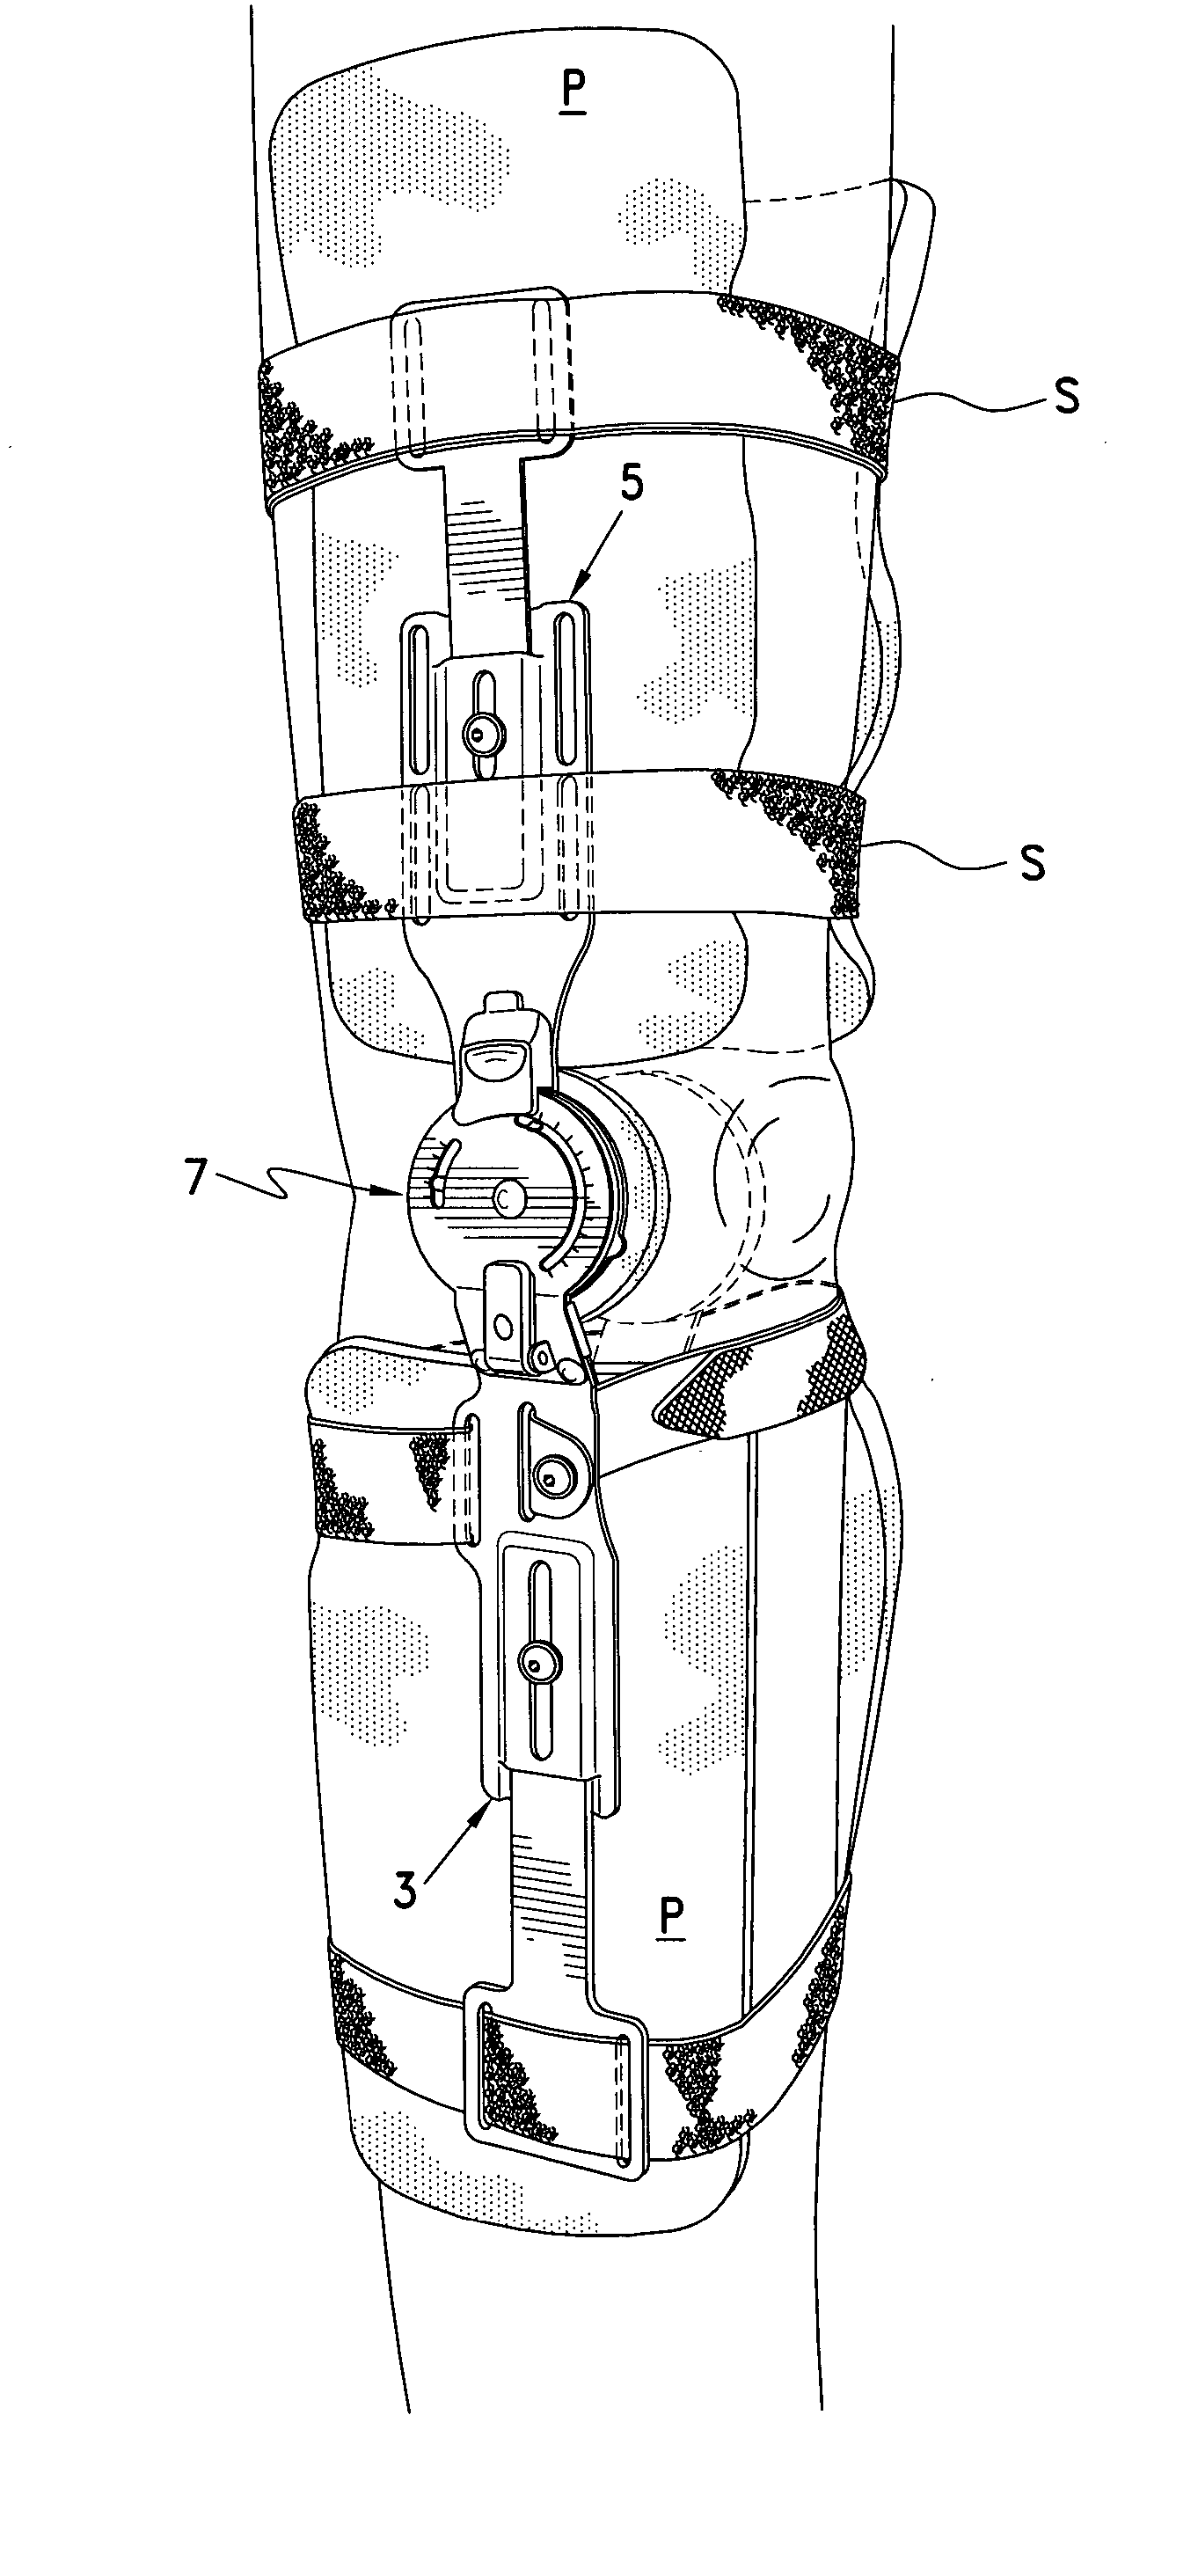 Post operative knee brace with multiple adjustment features